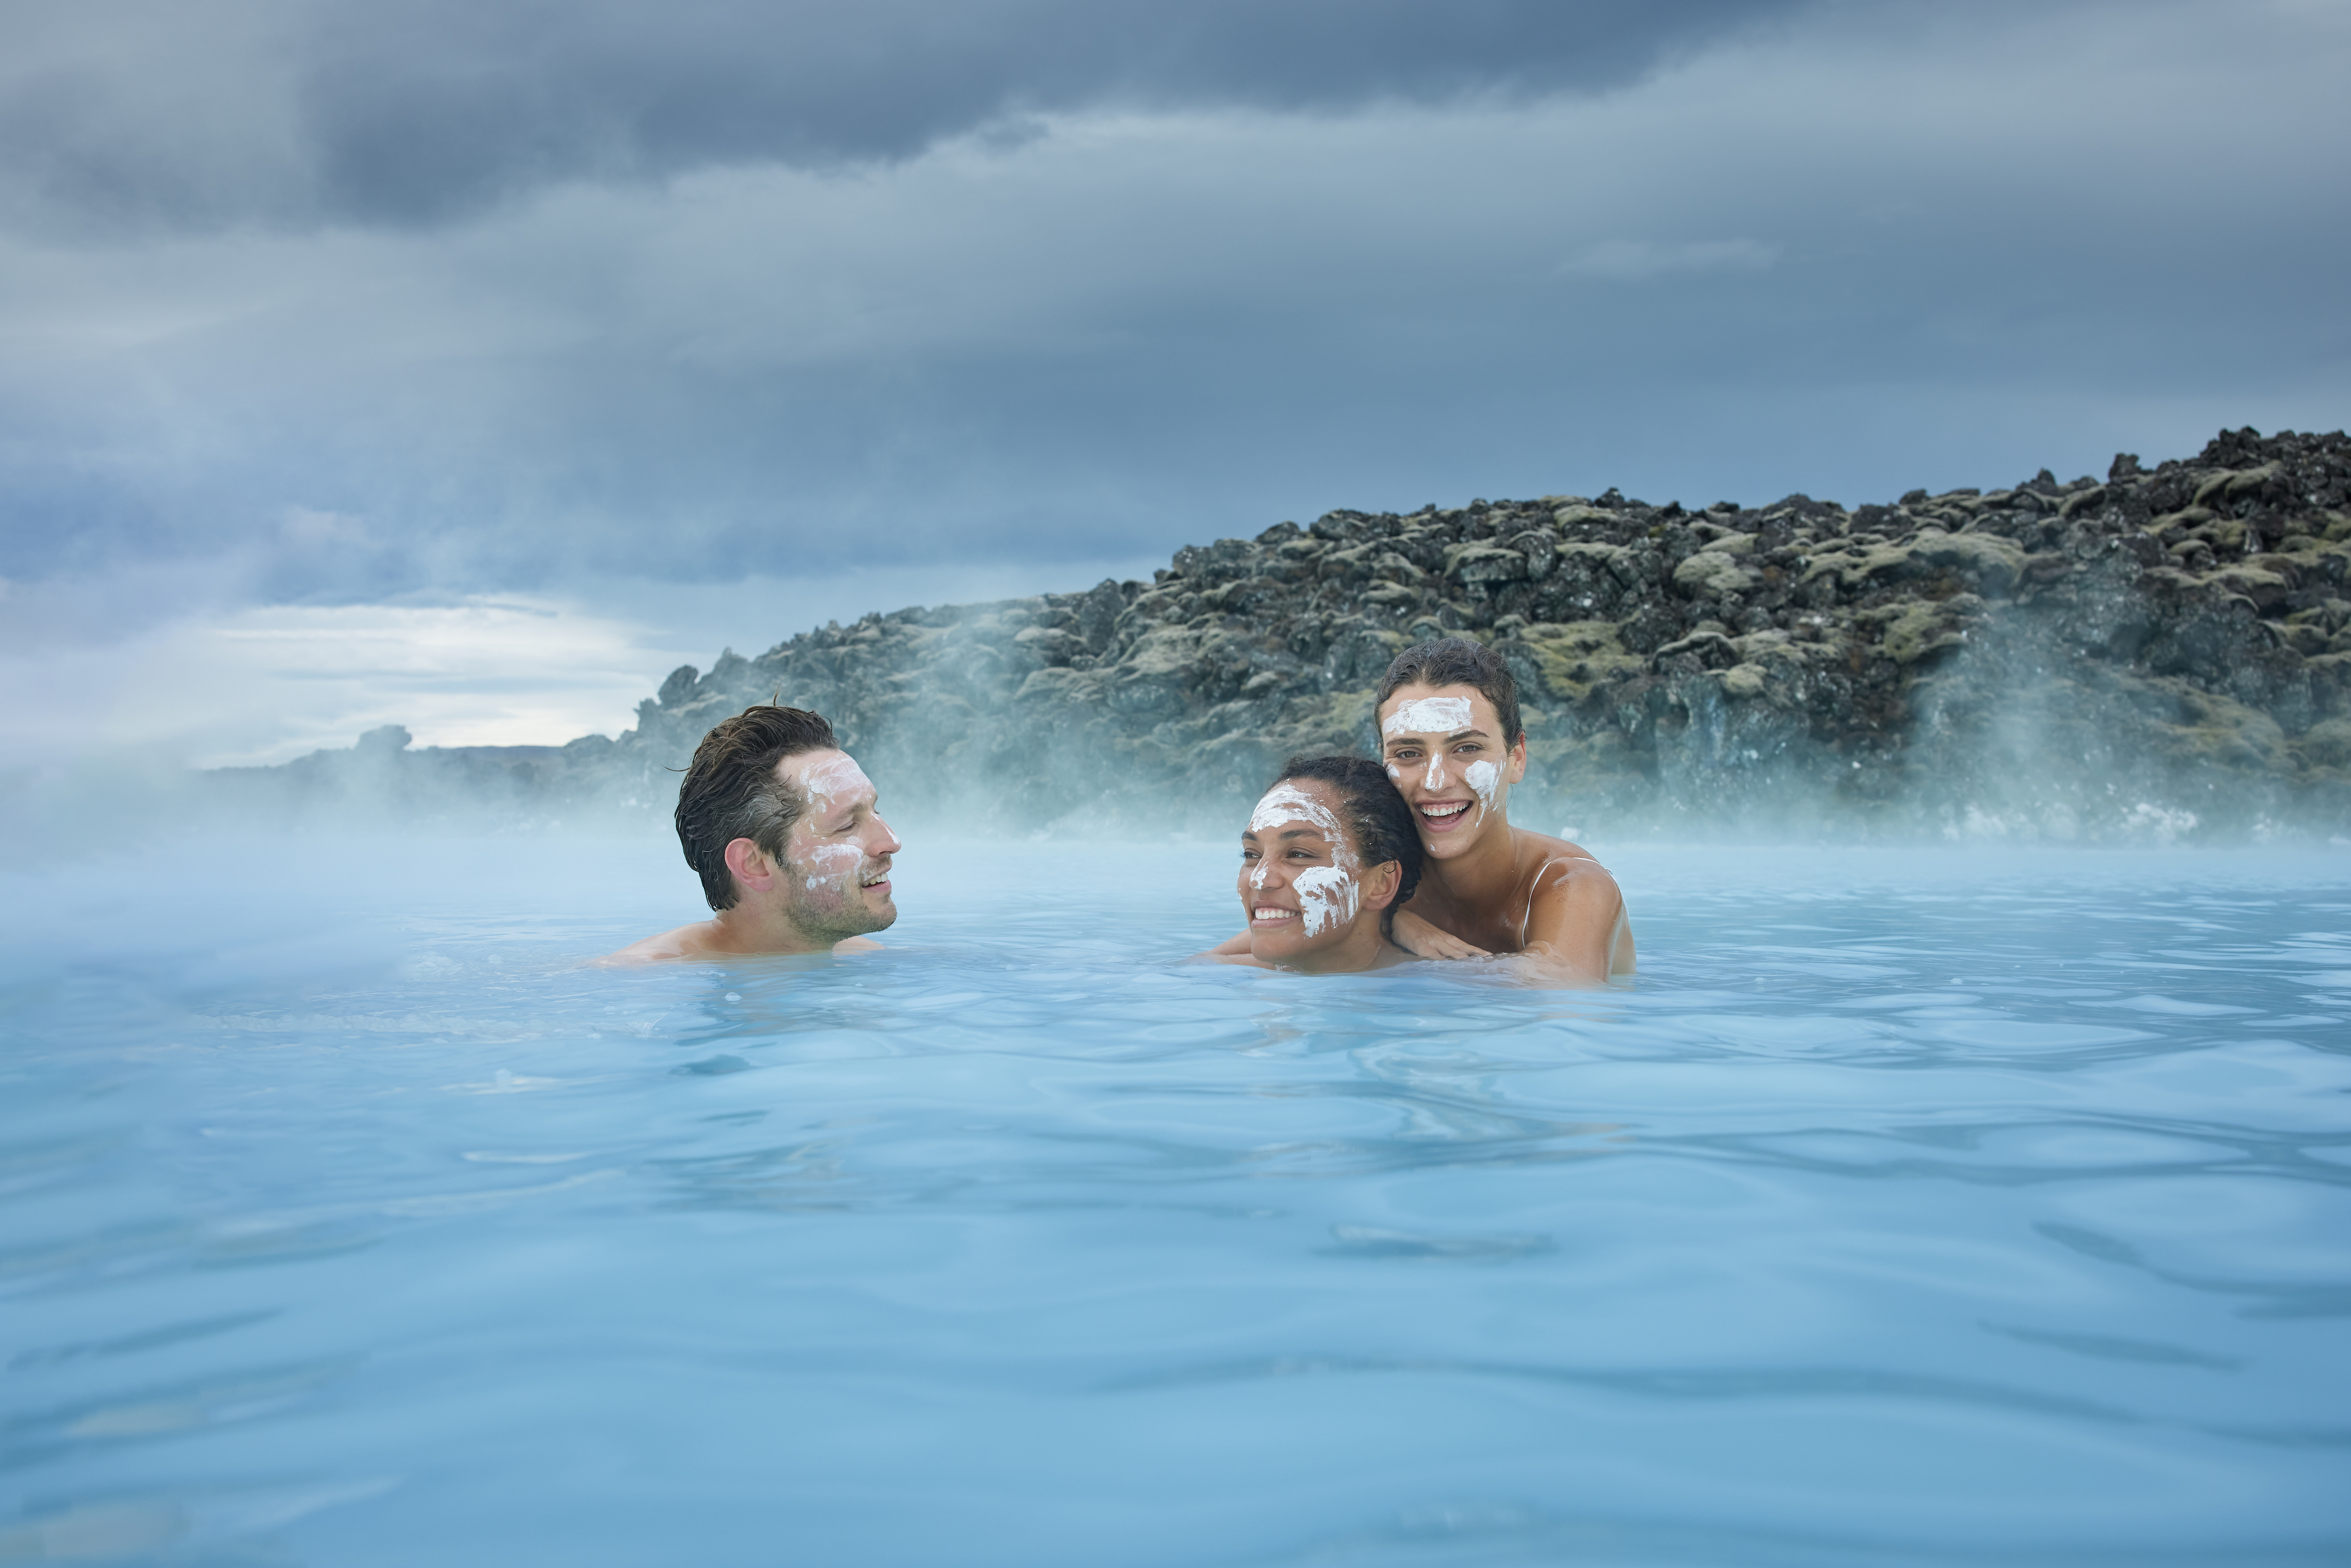 Blue Lagoon Geothermal Spa: Plan Your Day Visit